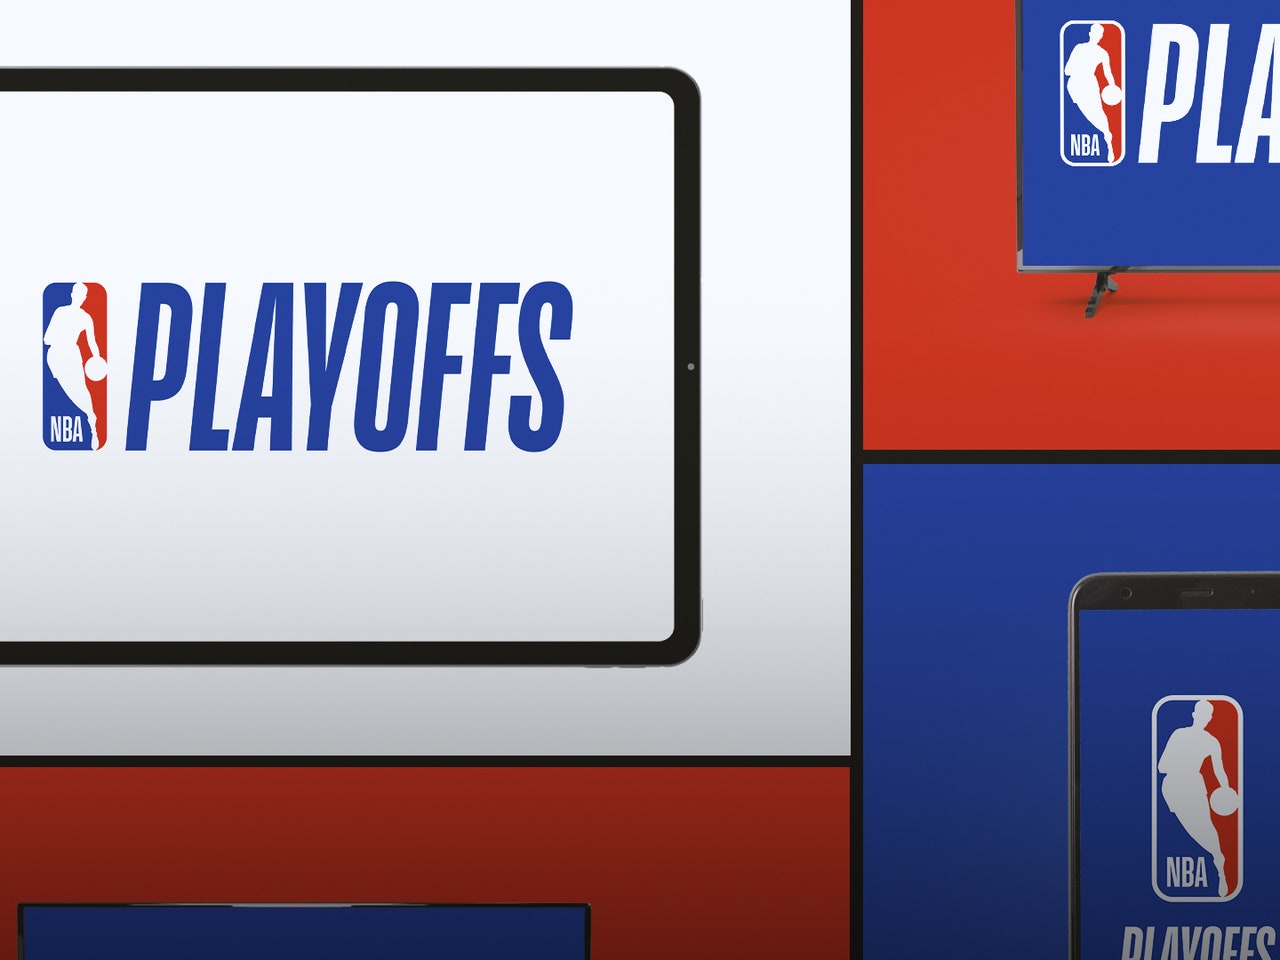 nba playoff games on television tonight